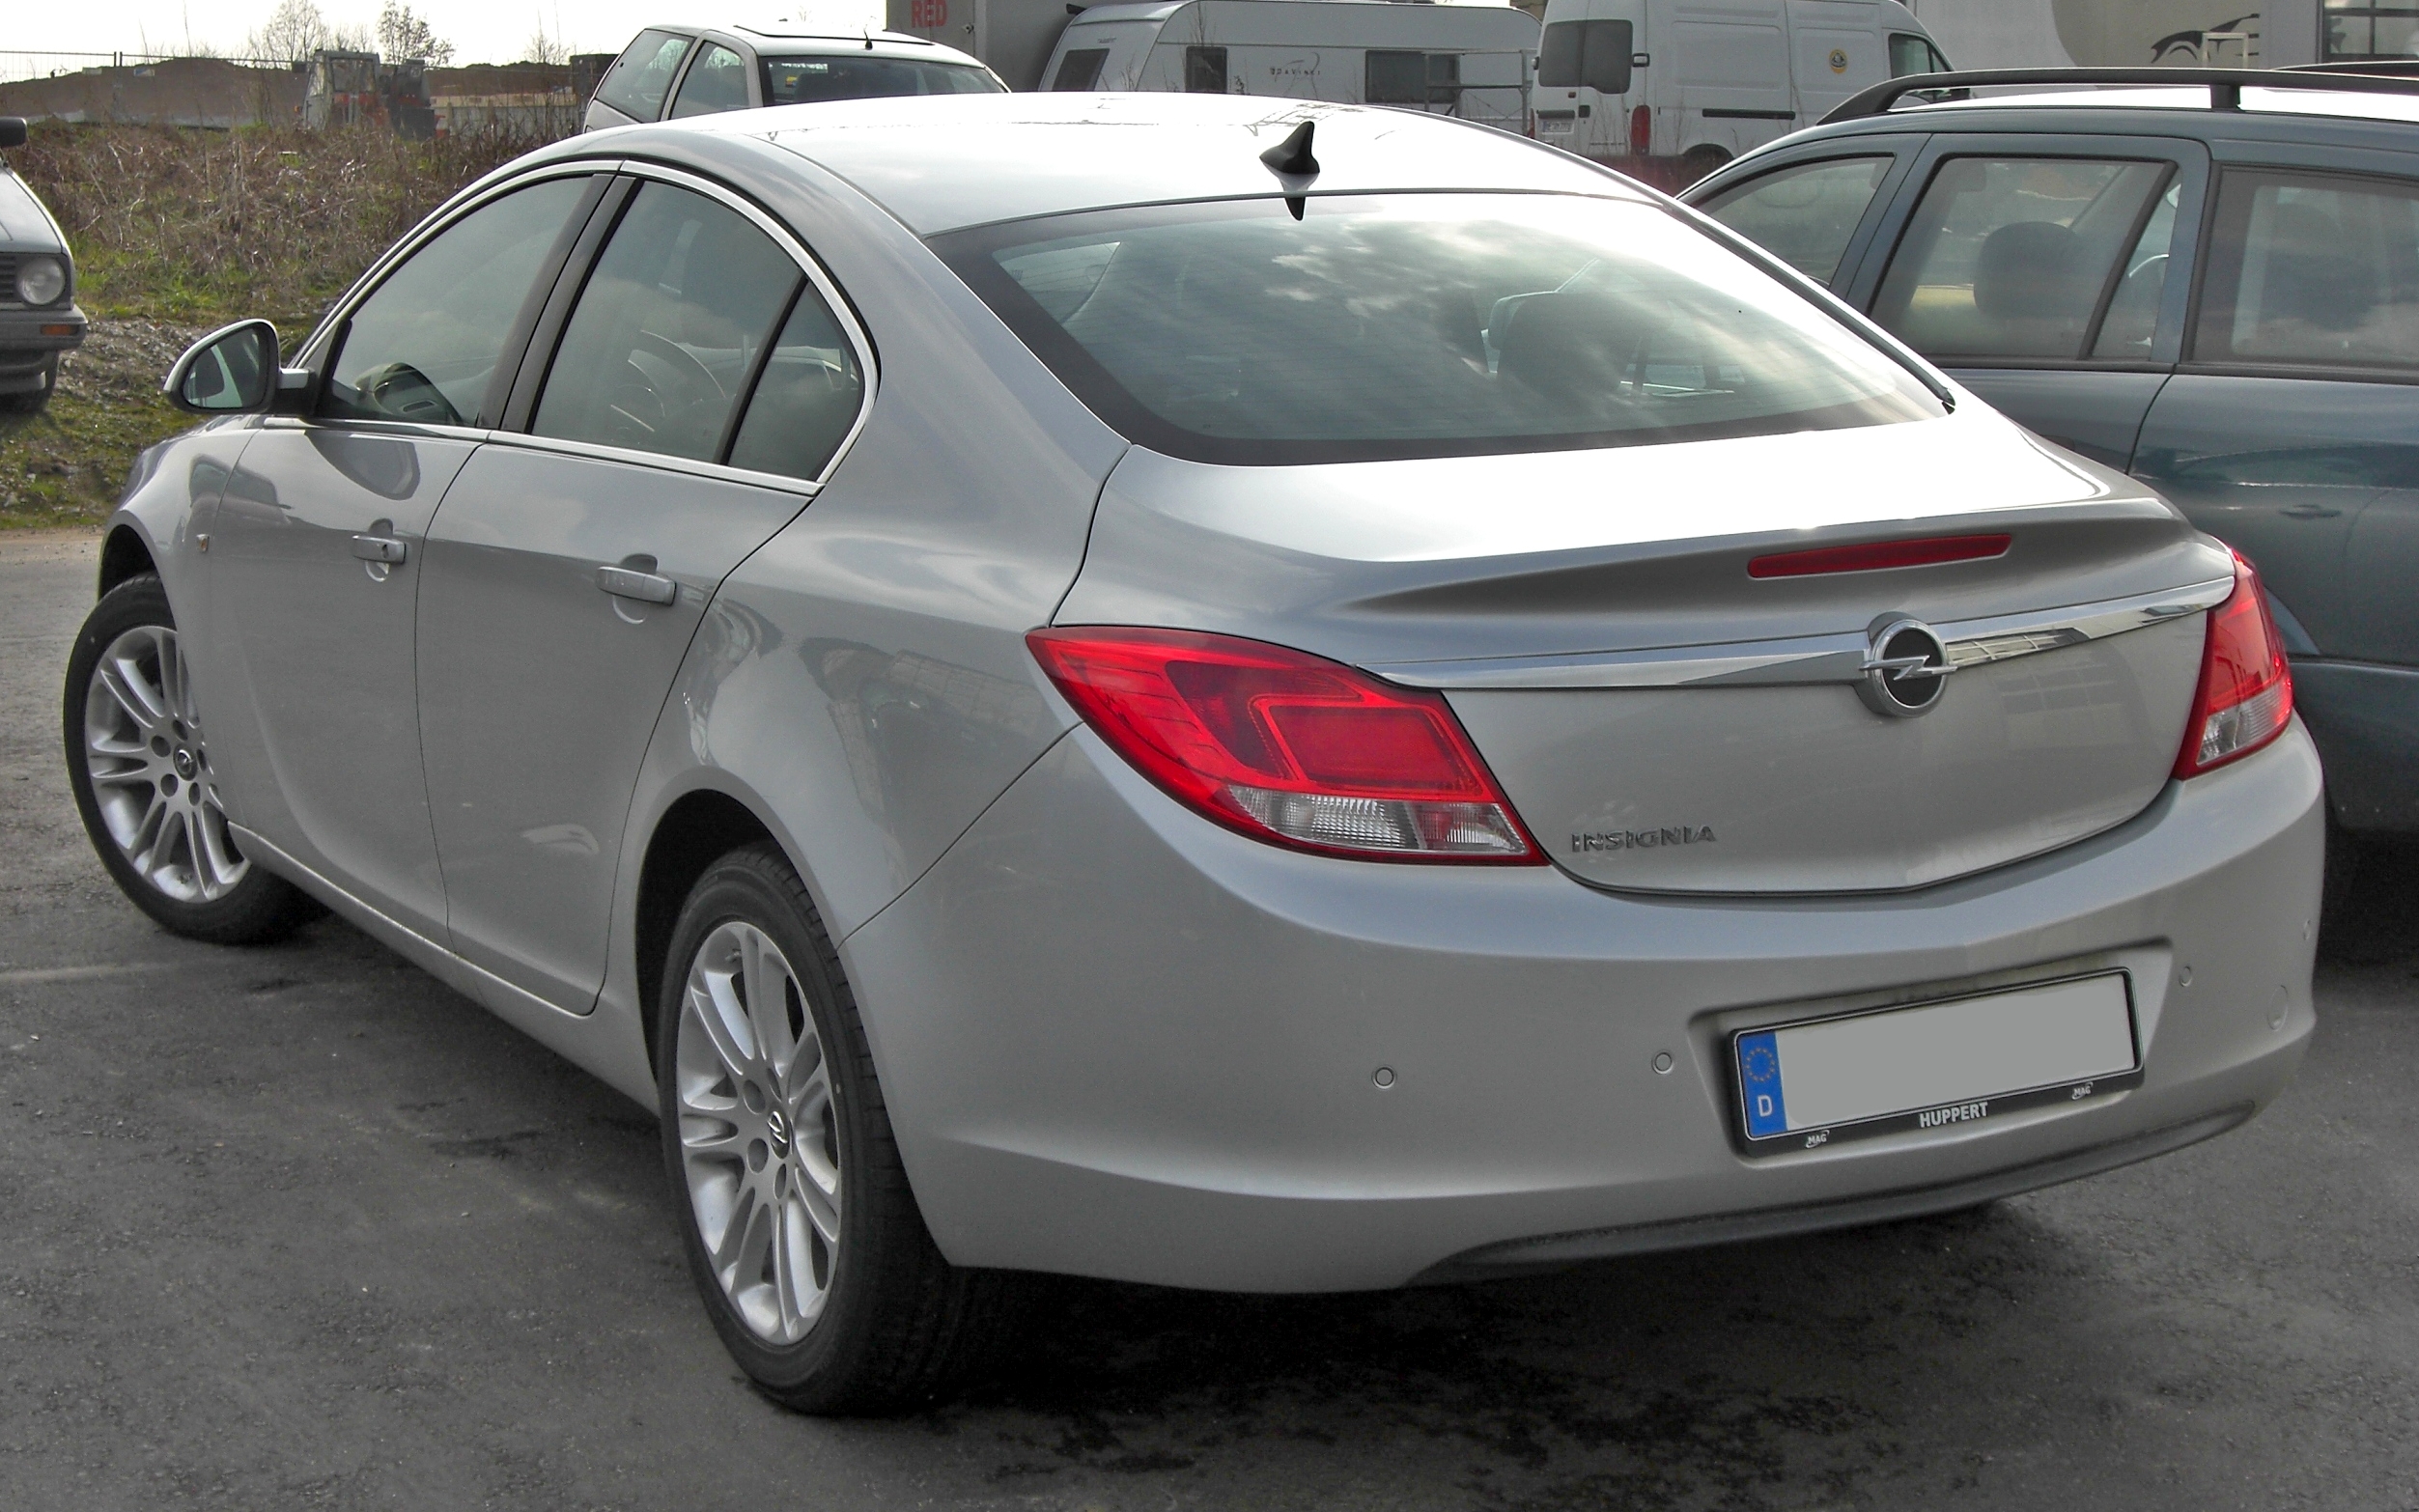 File:Opel Insignia 20090307 front.jpg - Wikimedia Commons